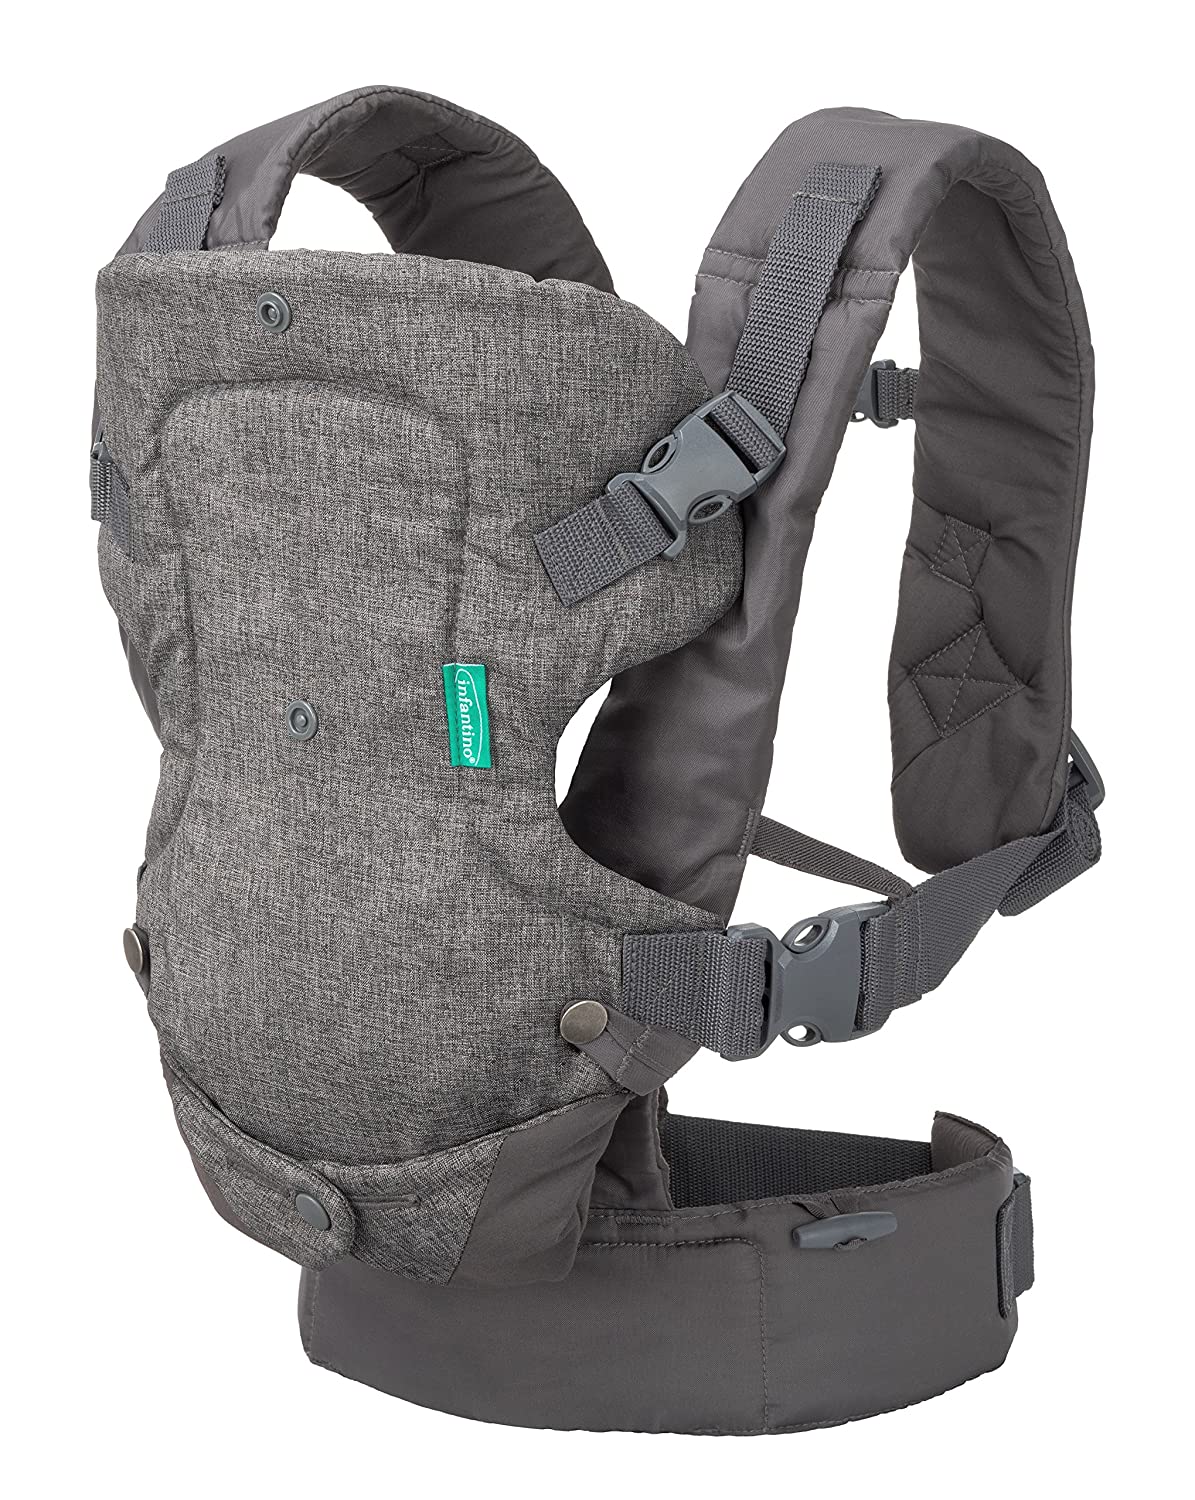 Infantino Flip 4 in 1 Convertible Carrier Review